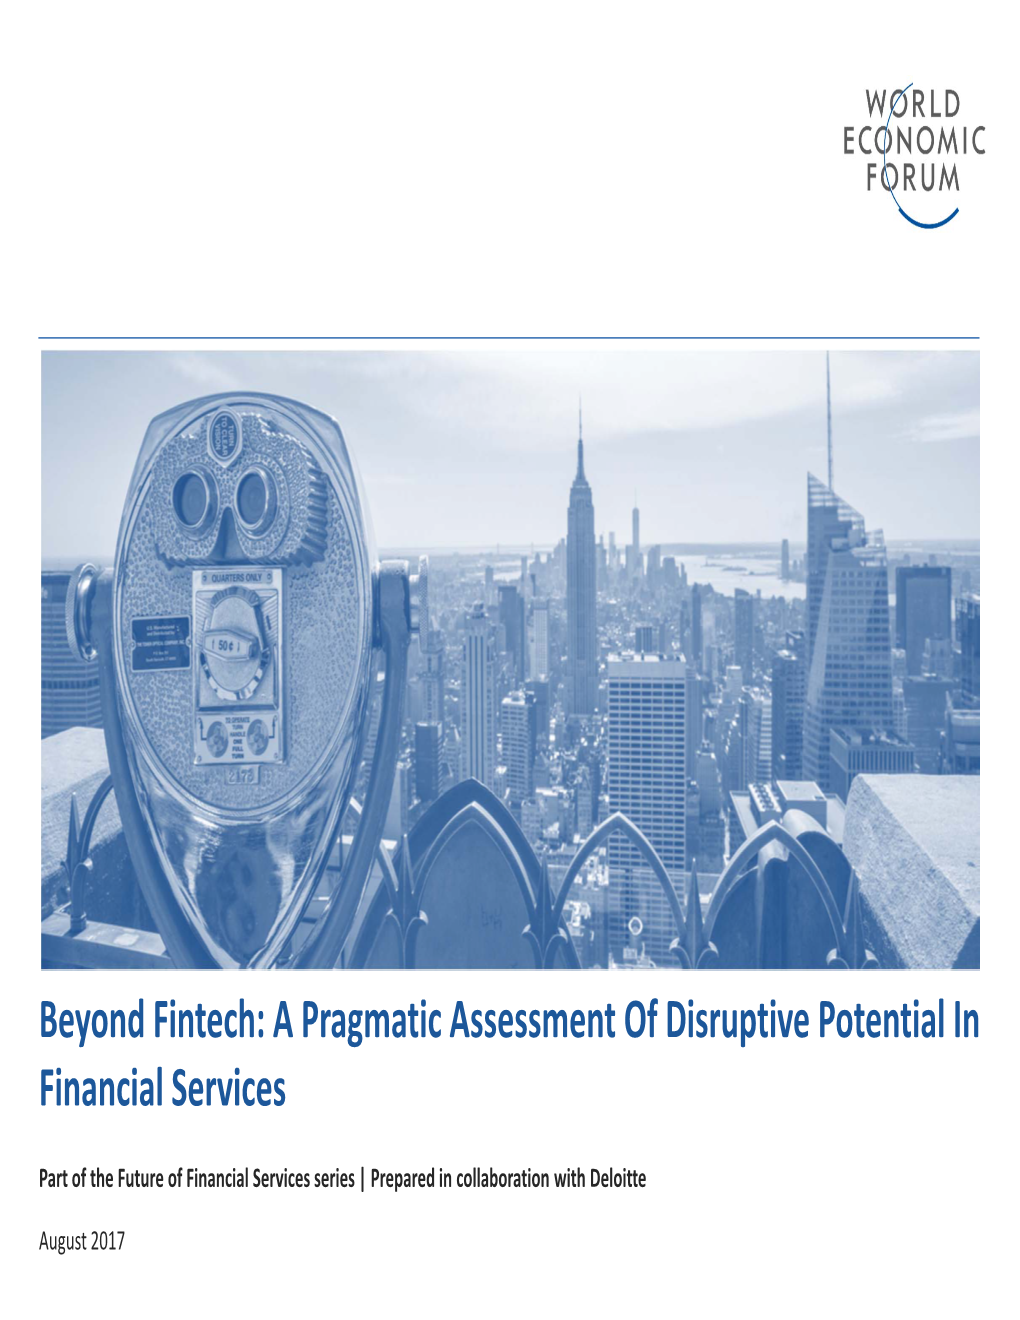 Beyond Fintech: a Pragmatic Assessment of Disruptive Potential in Financial Services